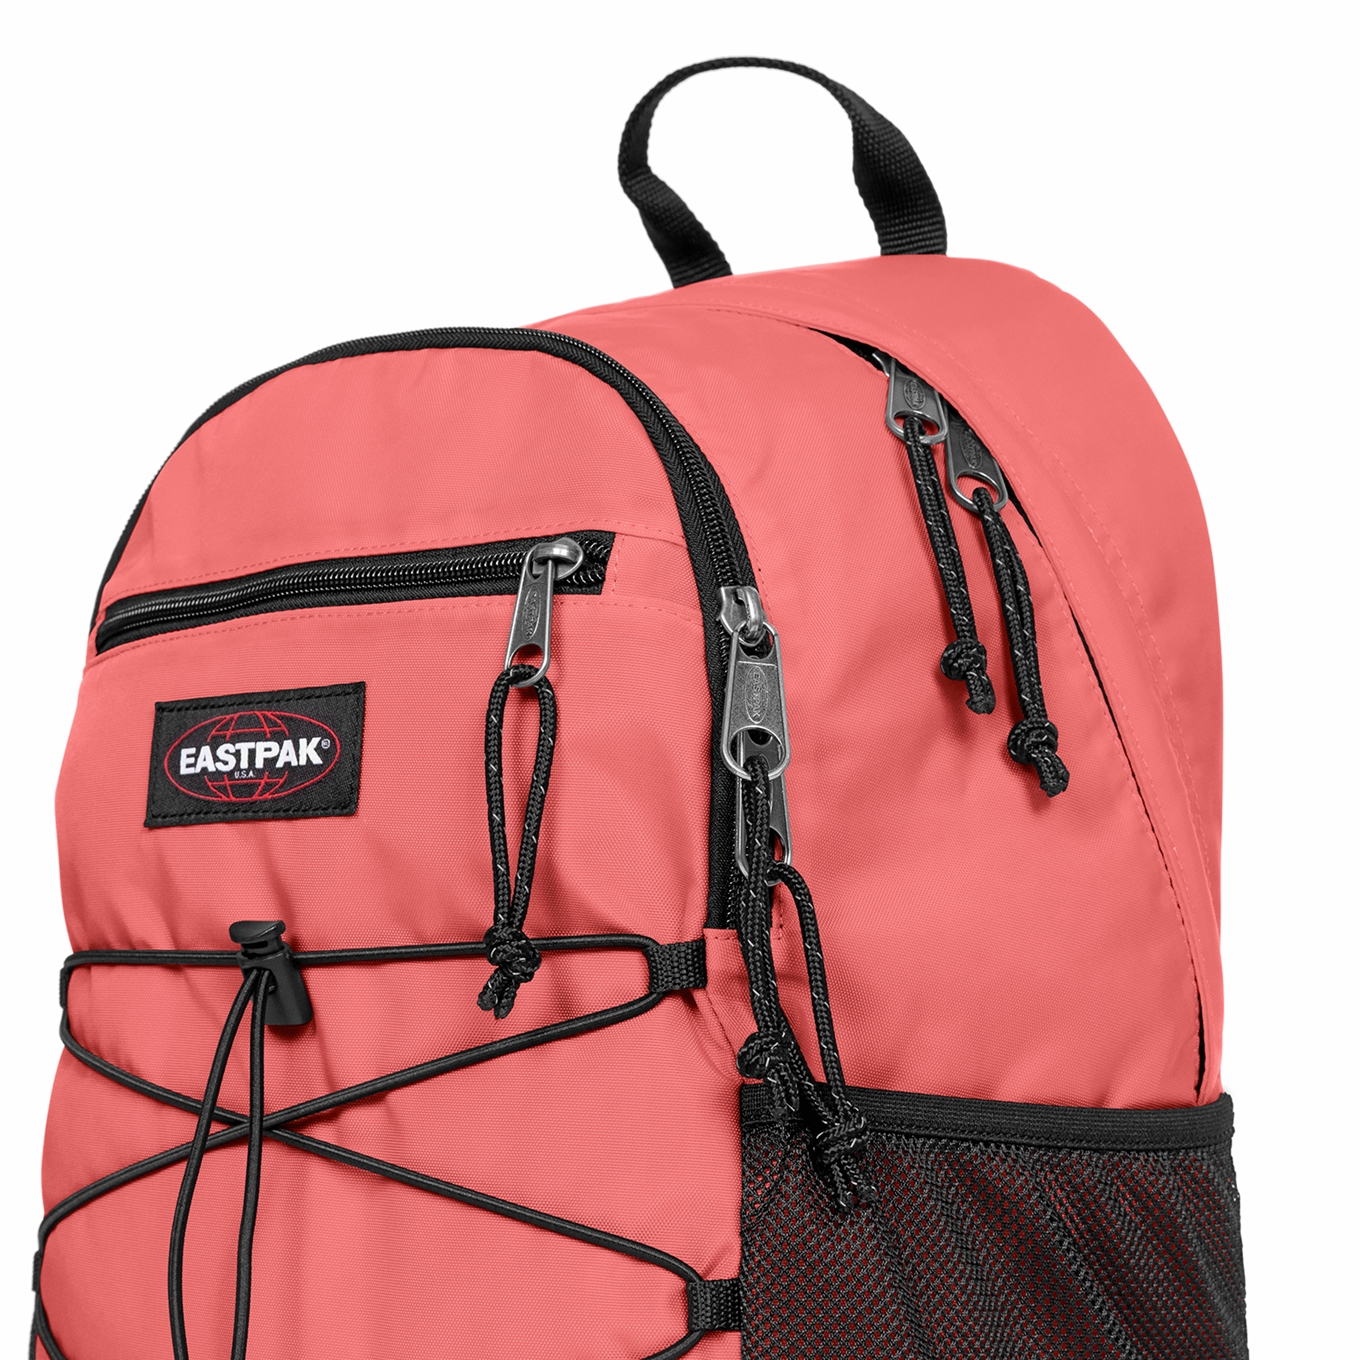 fontein Lauw zij is Eastpak Quidel Powr Powr passion | Travelbags.be